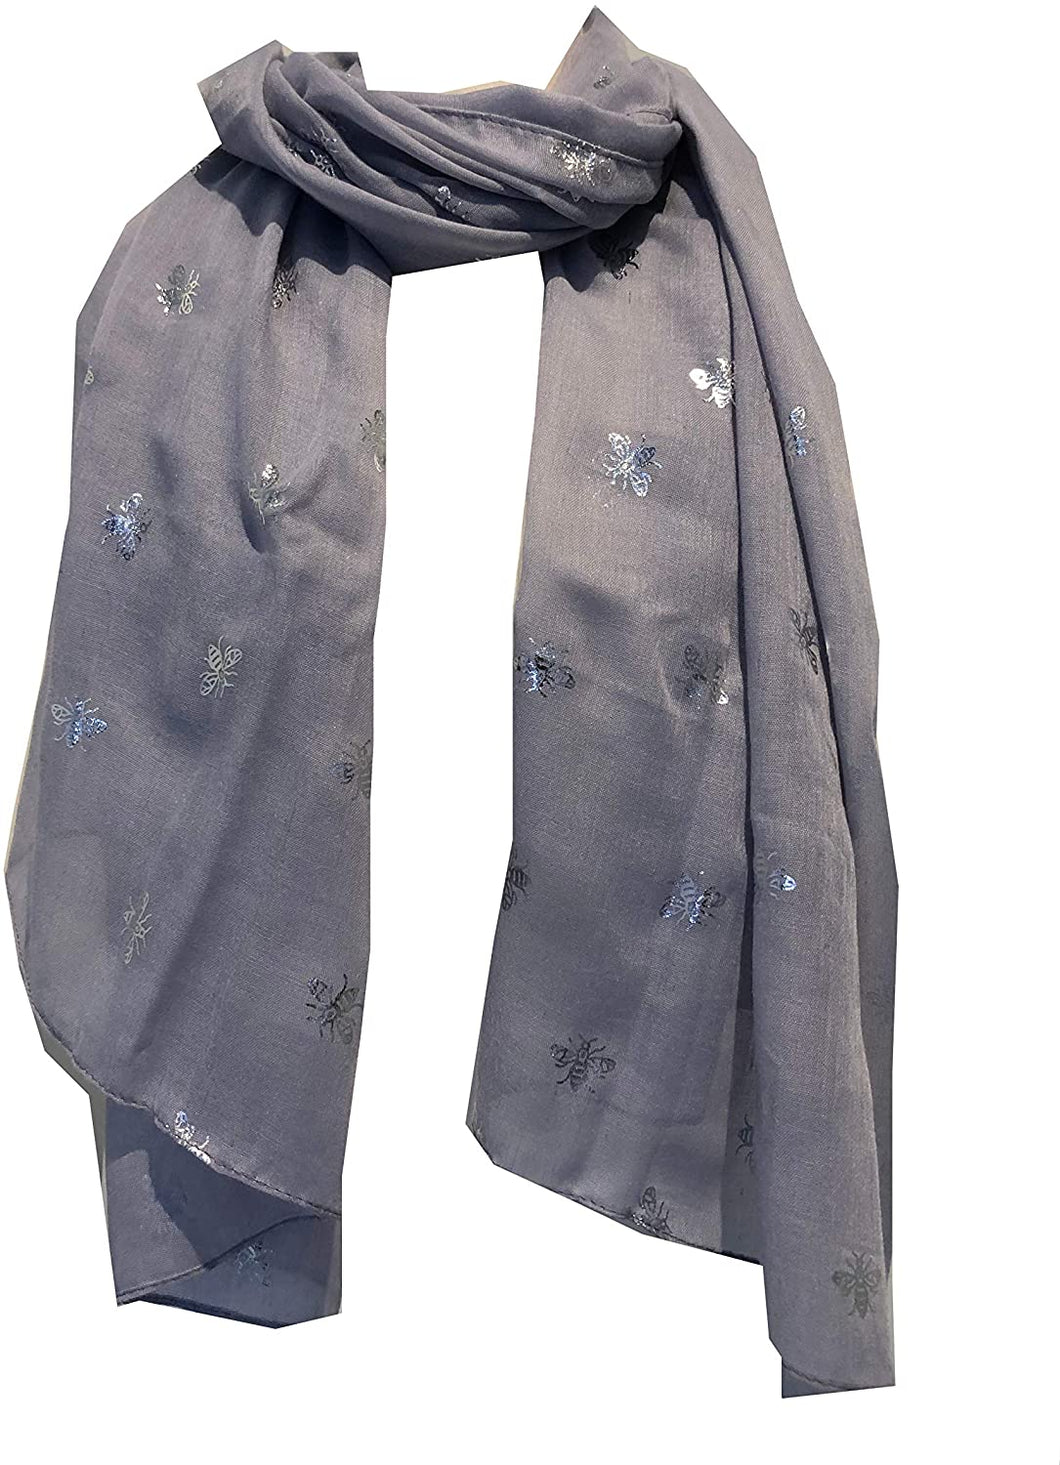 Pamper Yourself Now Grey with Silver Bumble Bees Long Scarf. Great Present/Gift for bee Lovers.